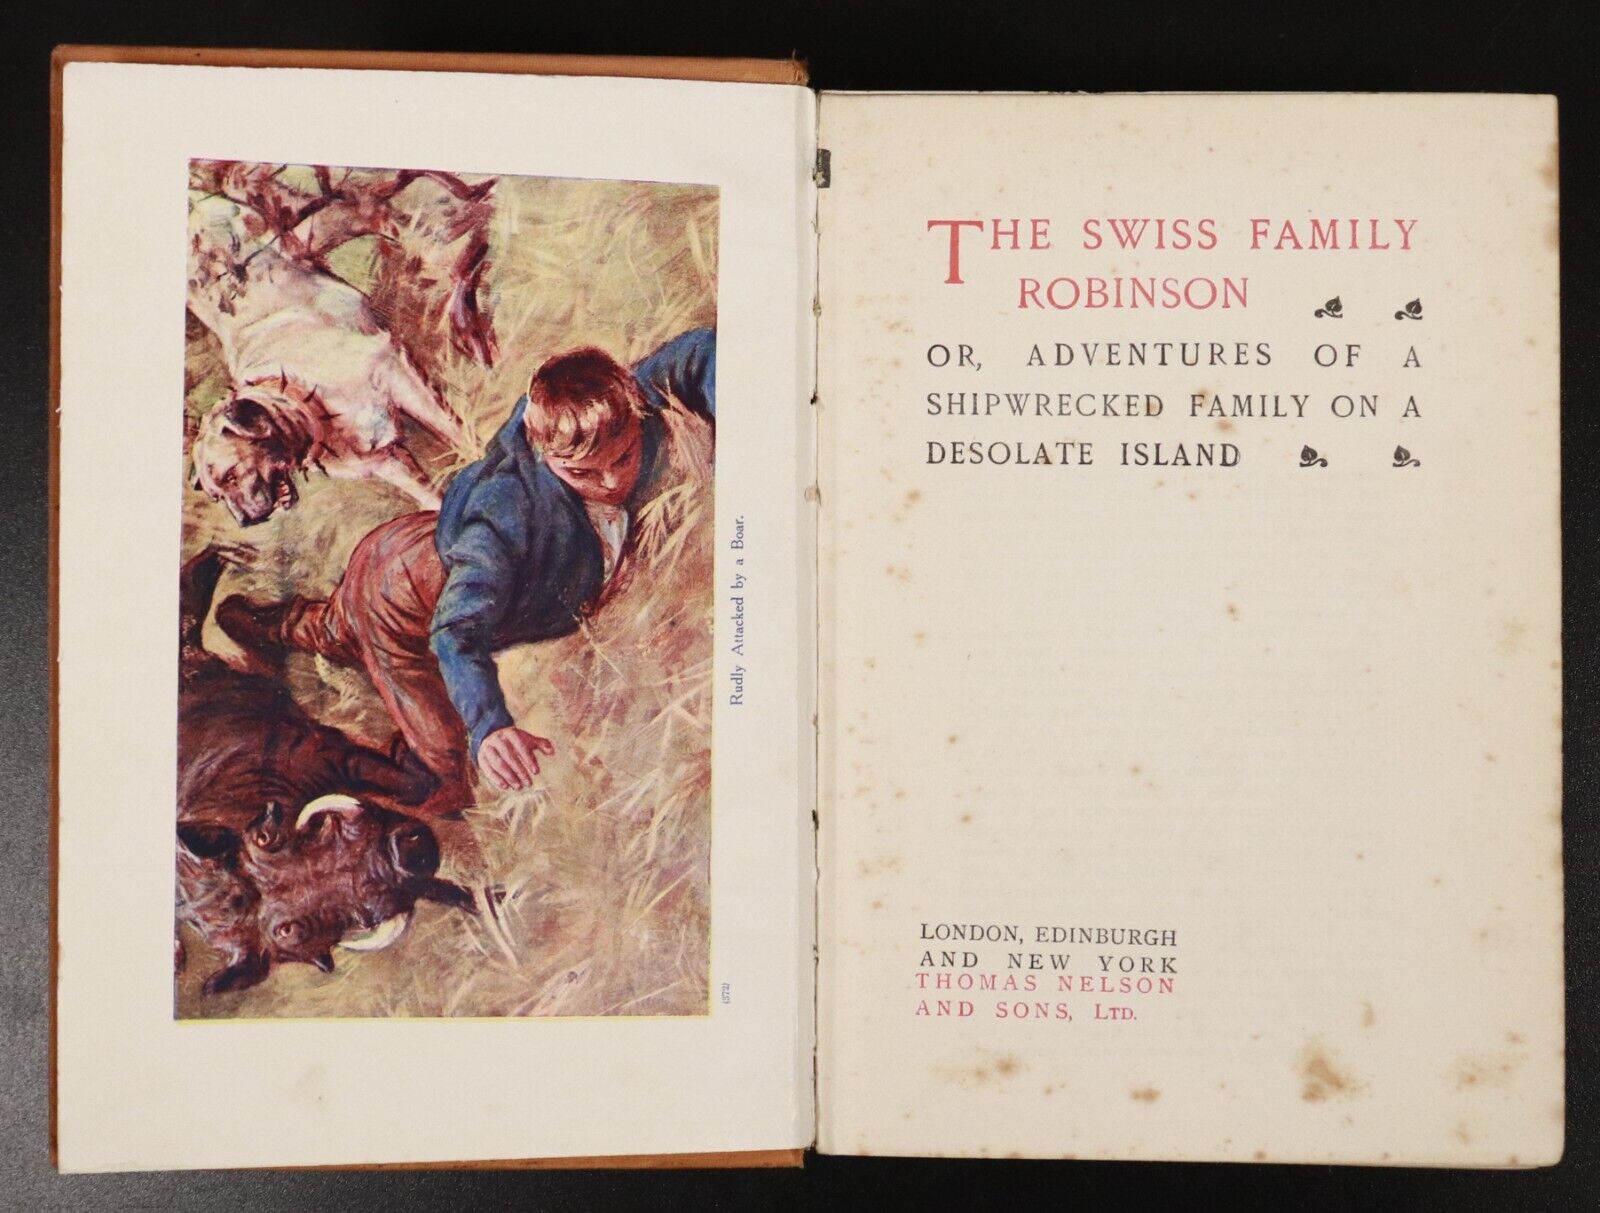 c1910 The Swiss Family Robinson by J.D. Wyss Classic Adventure Fiction Book - 0